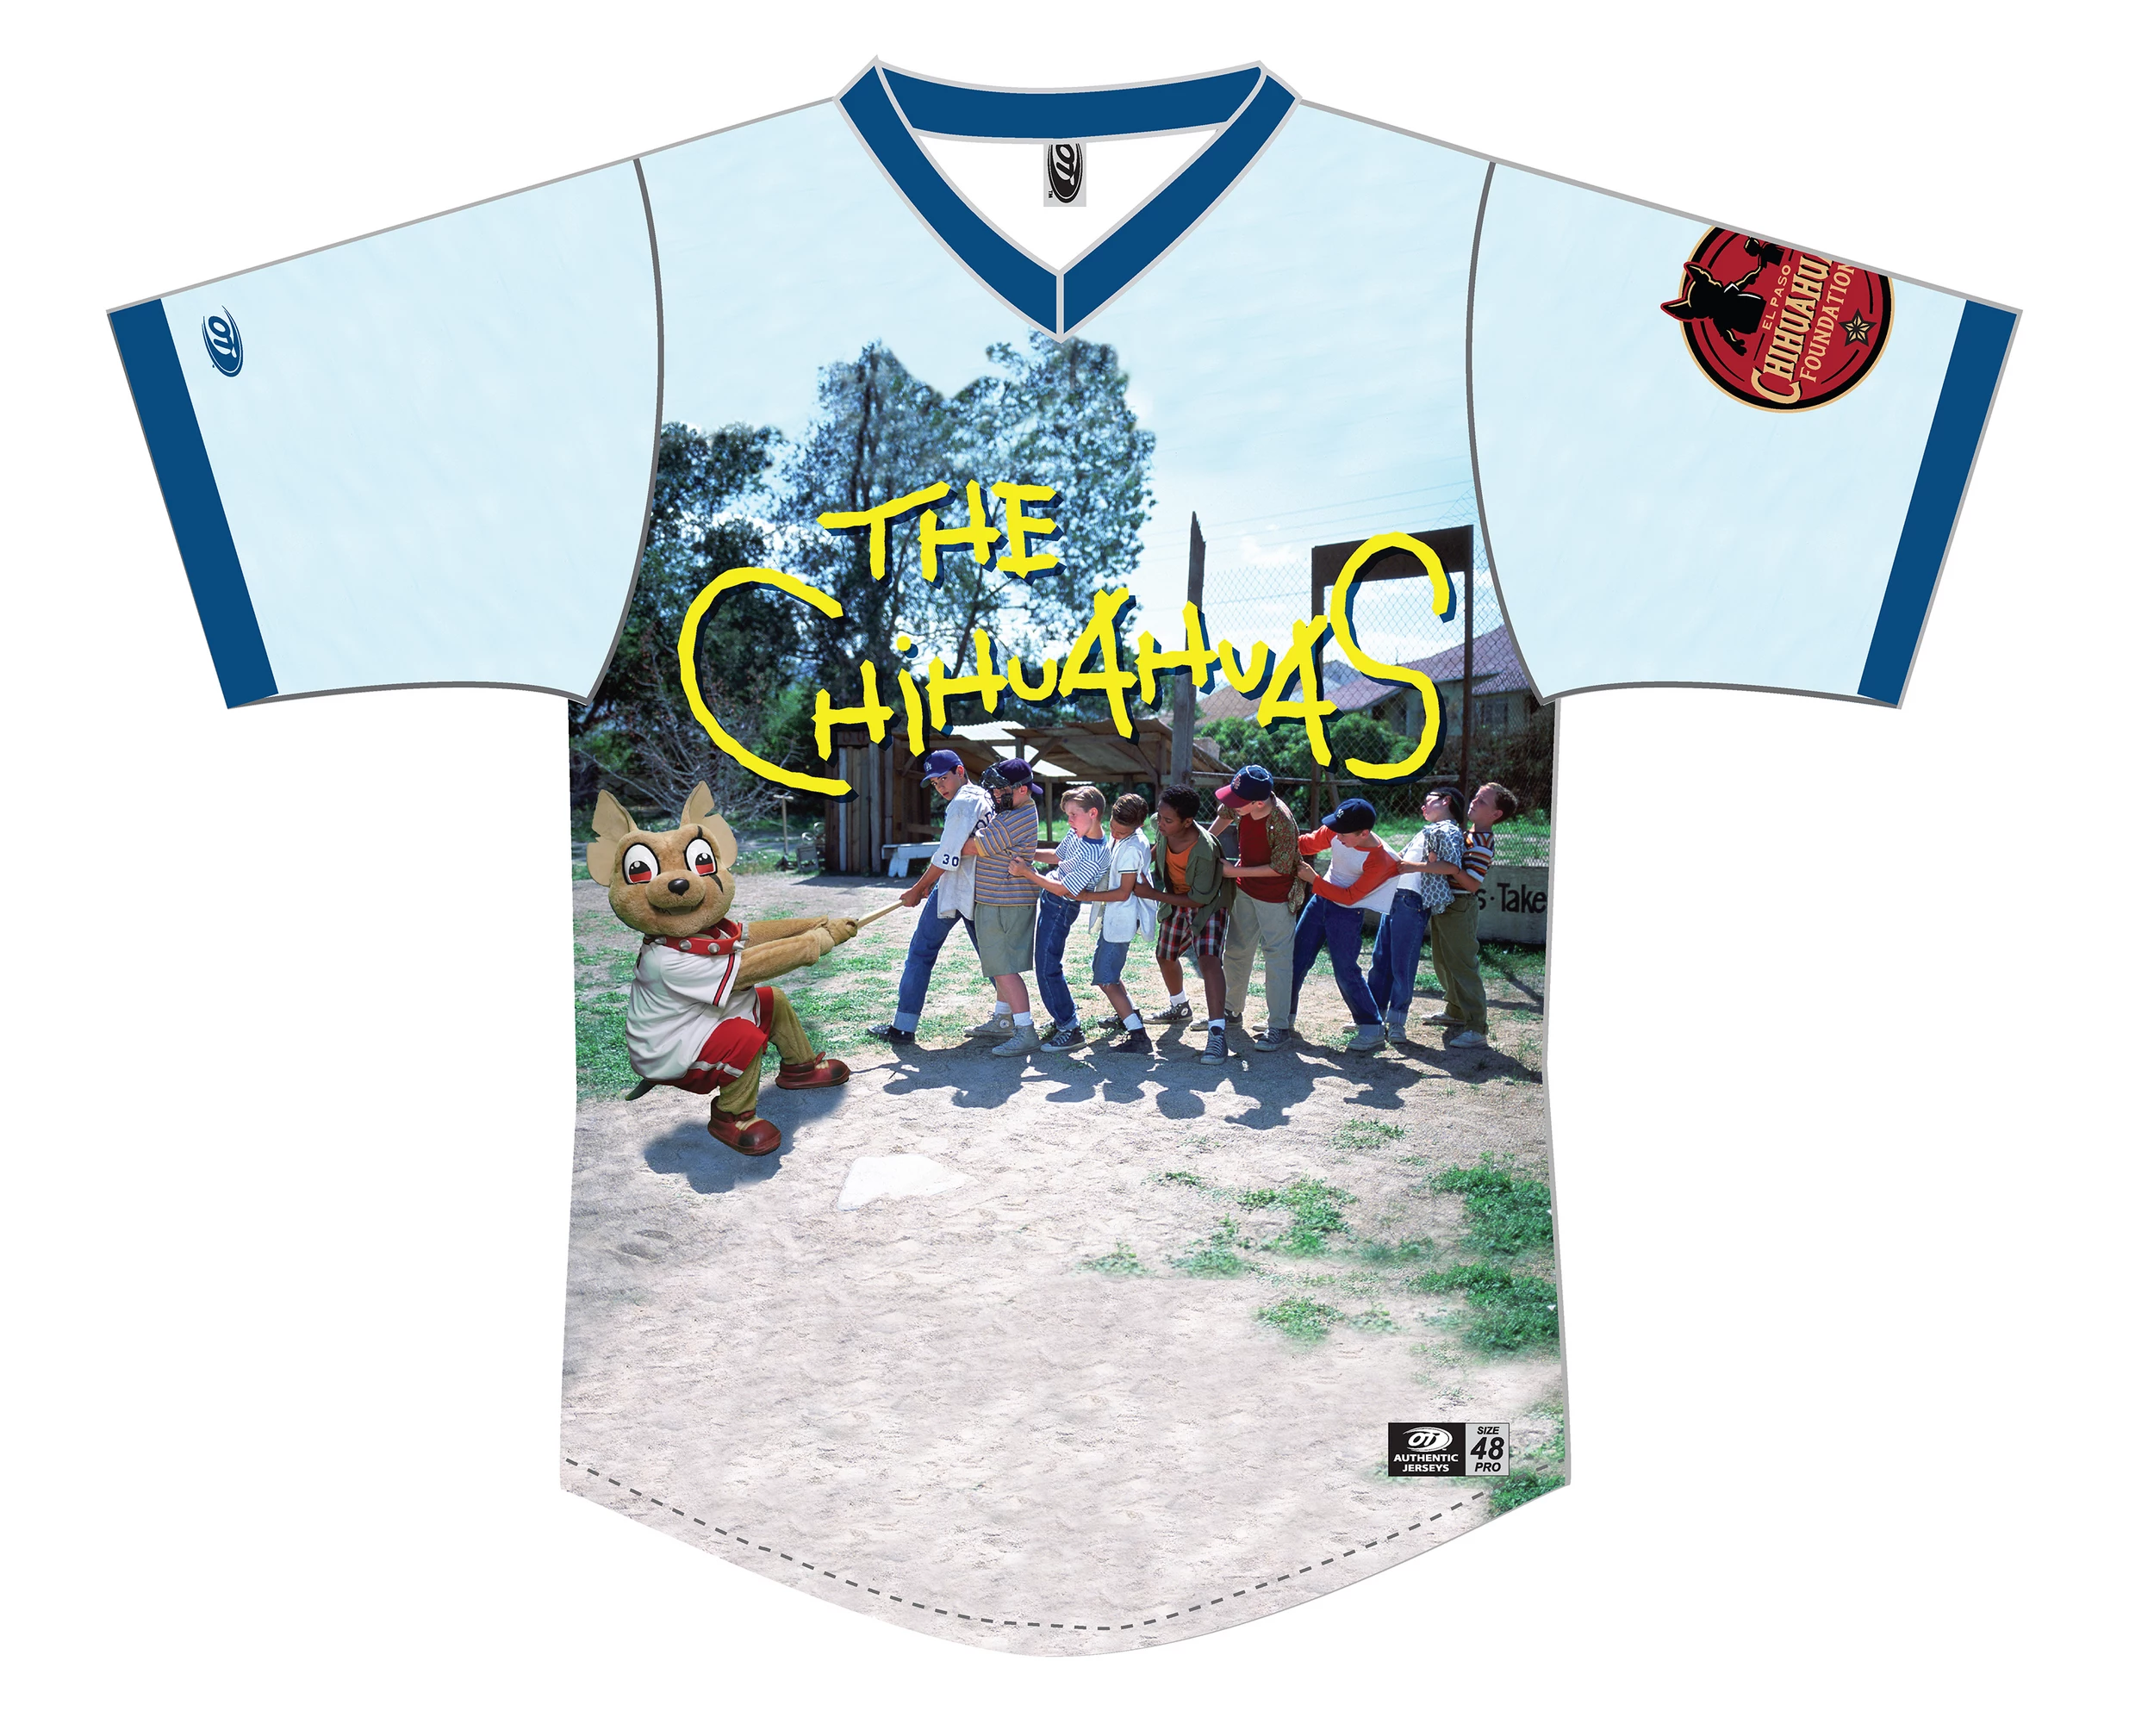 Chihuahuas Celebrate 'The Sandlot' with Jersey Auction June 2nd